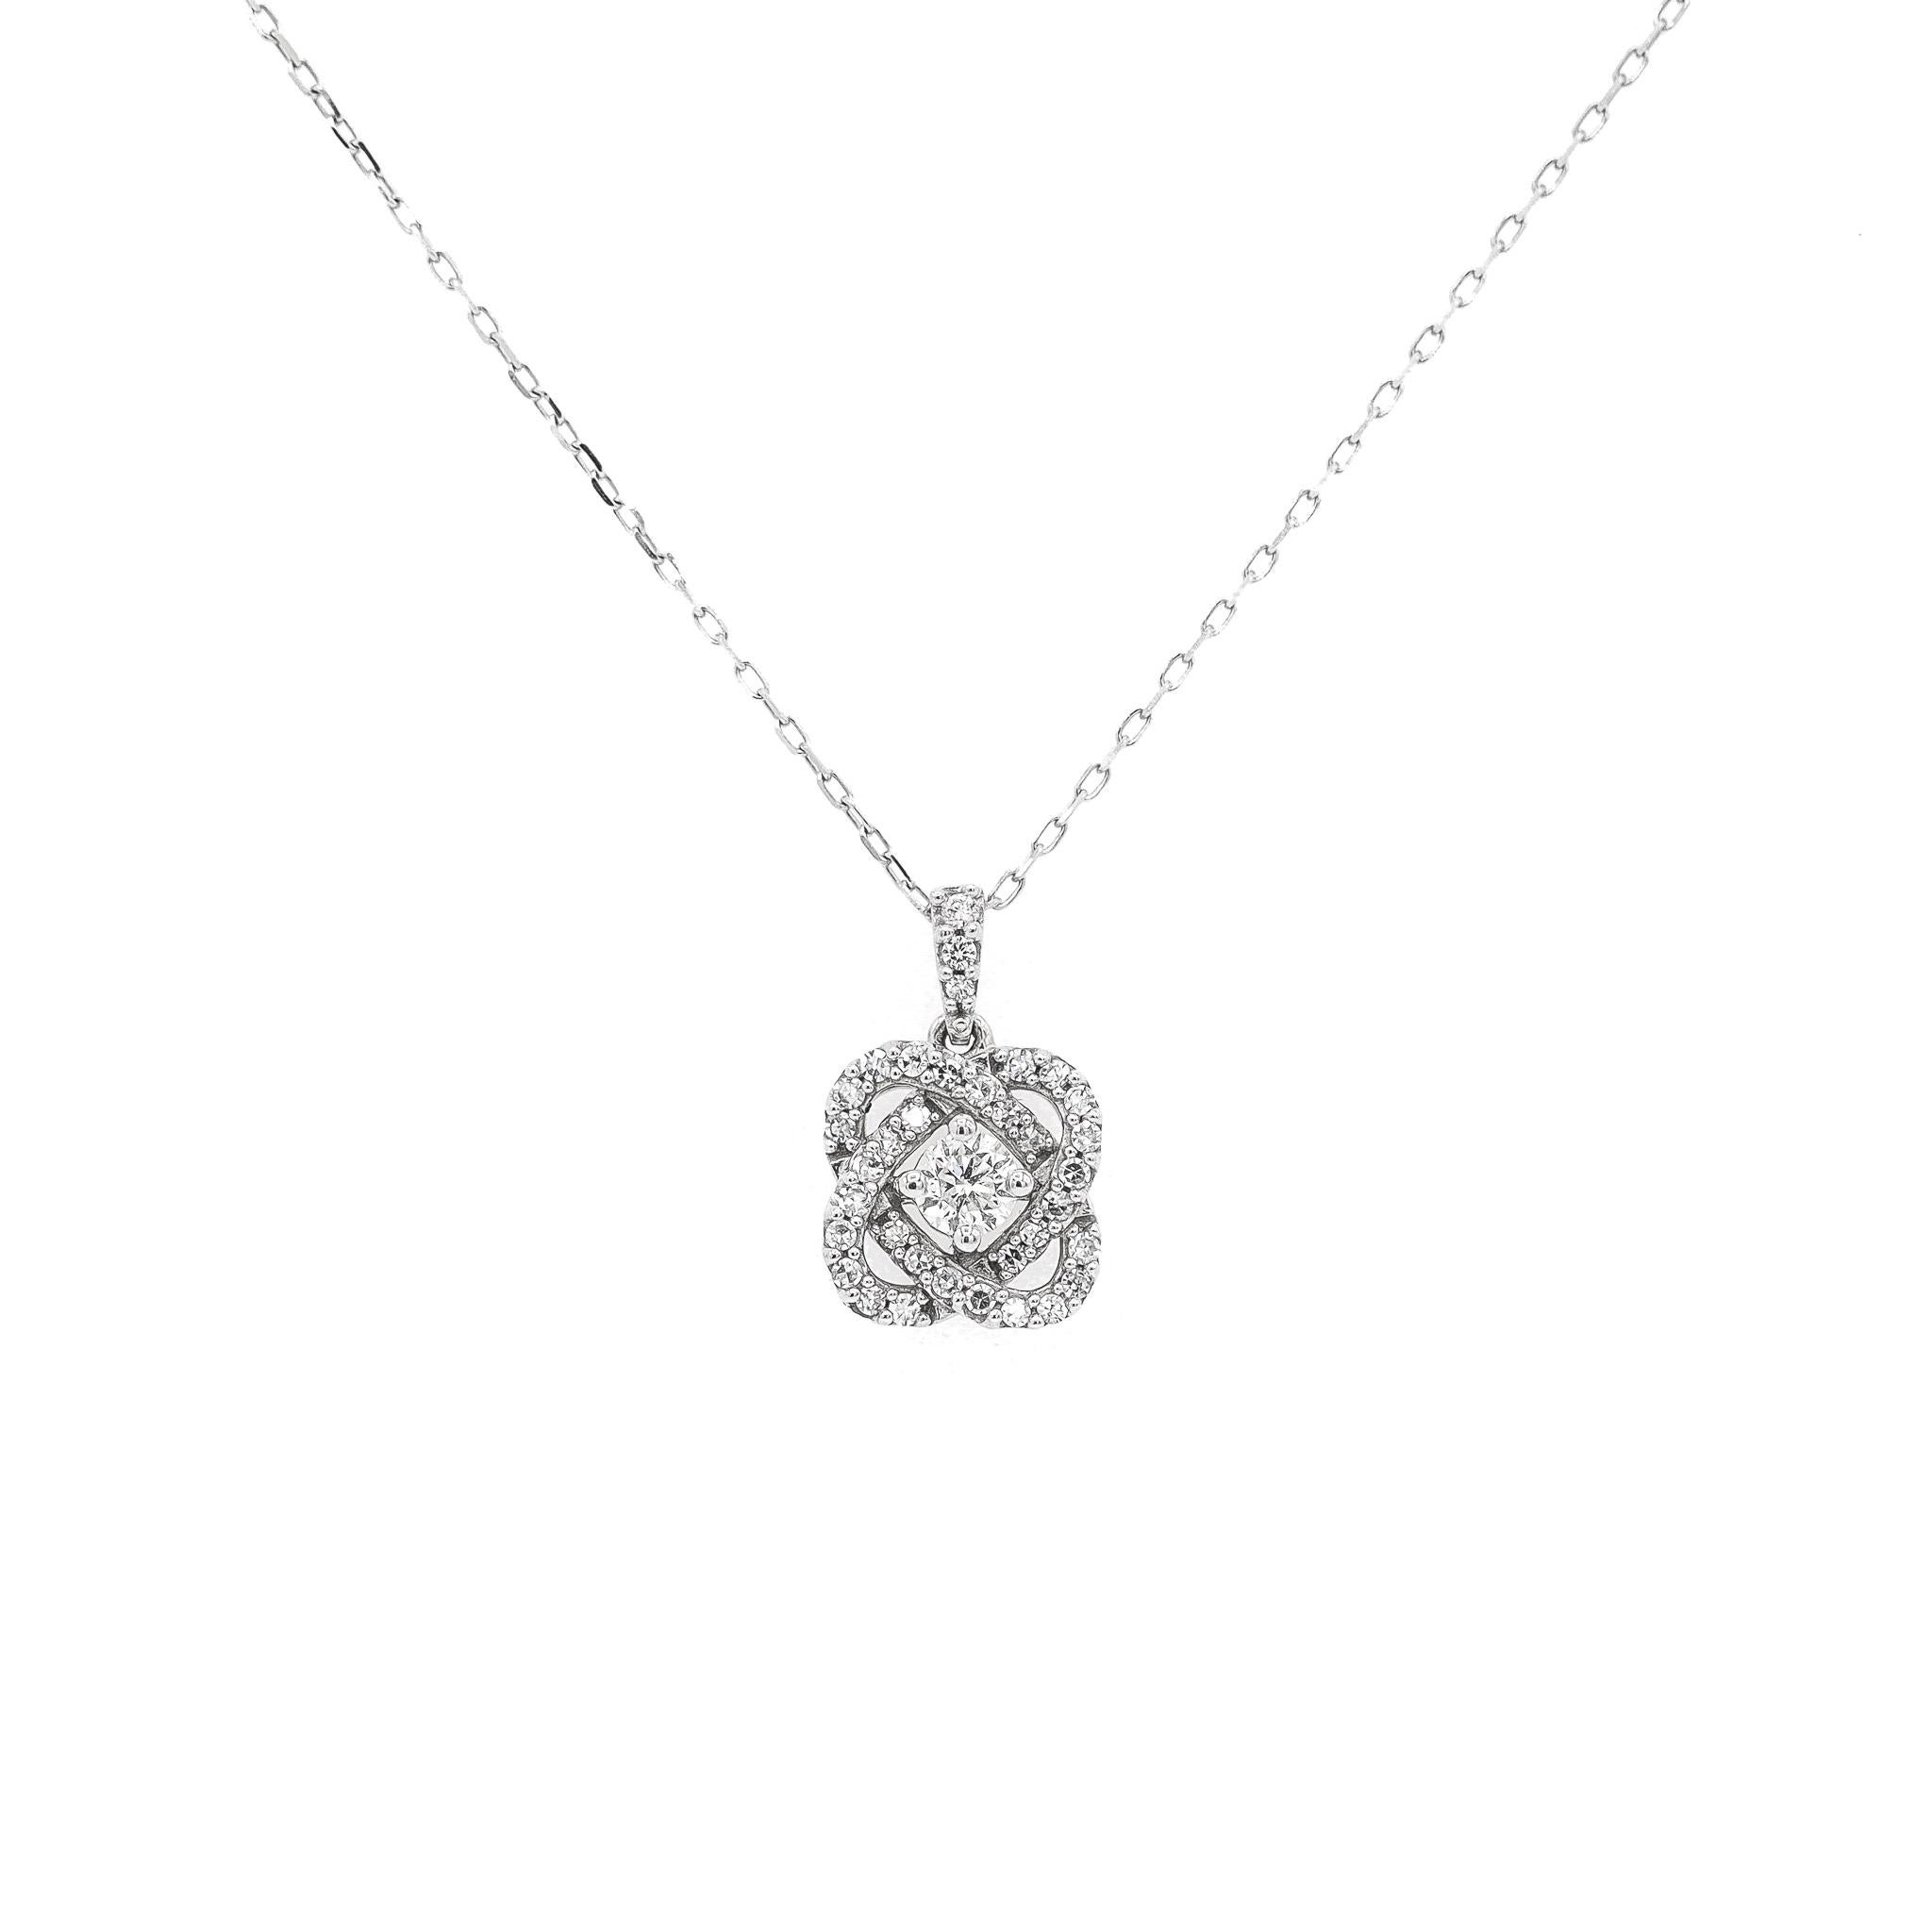 One lady's custom made polished 10K white gold princess, diamond uniform link necklace. The necklace measures approximately 18.00 inches in length and weighs a total of 2.70 grams. Engraved with 